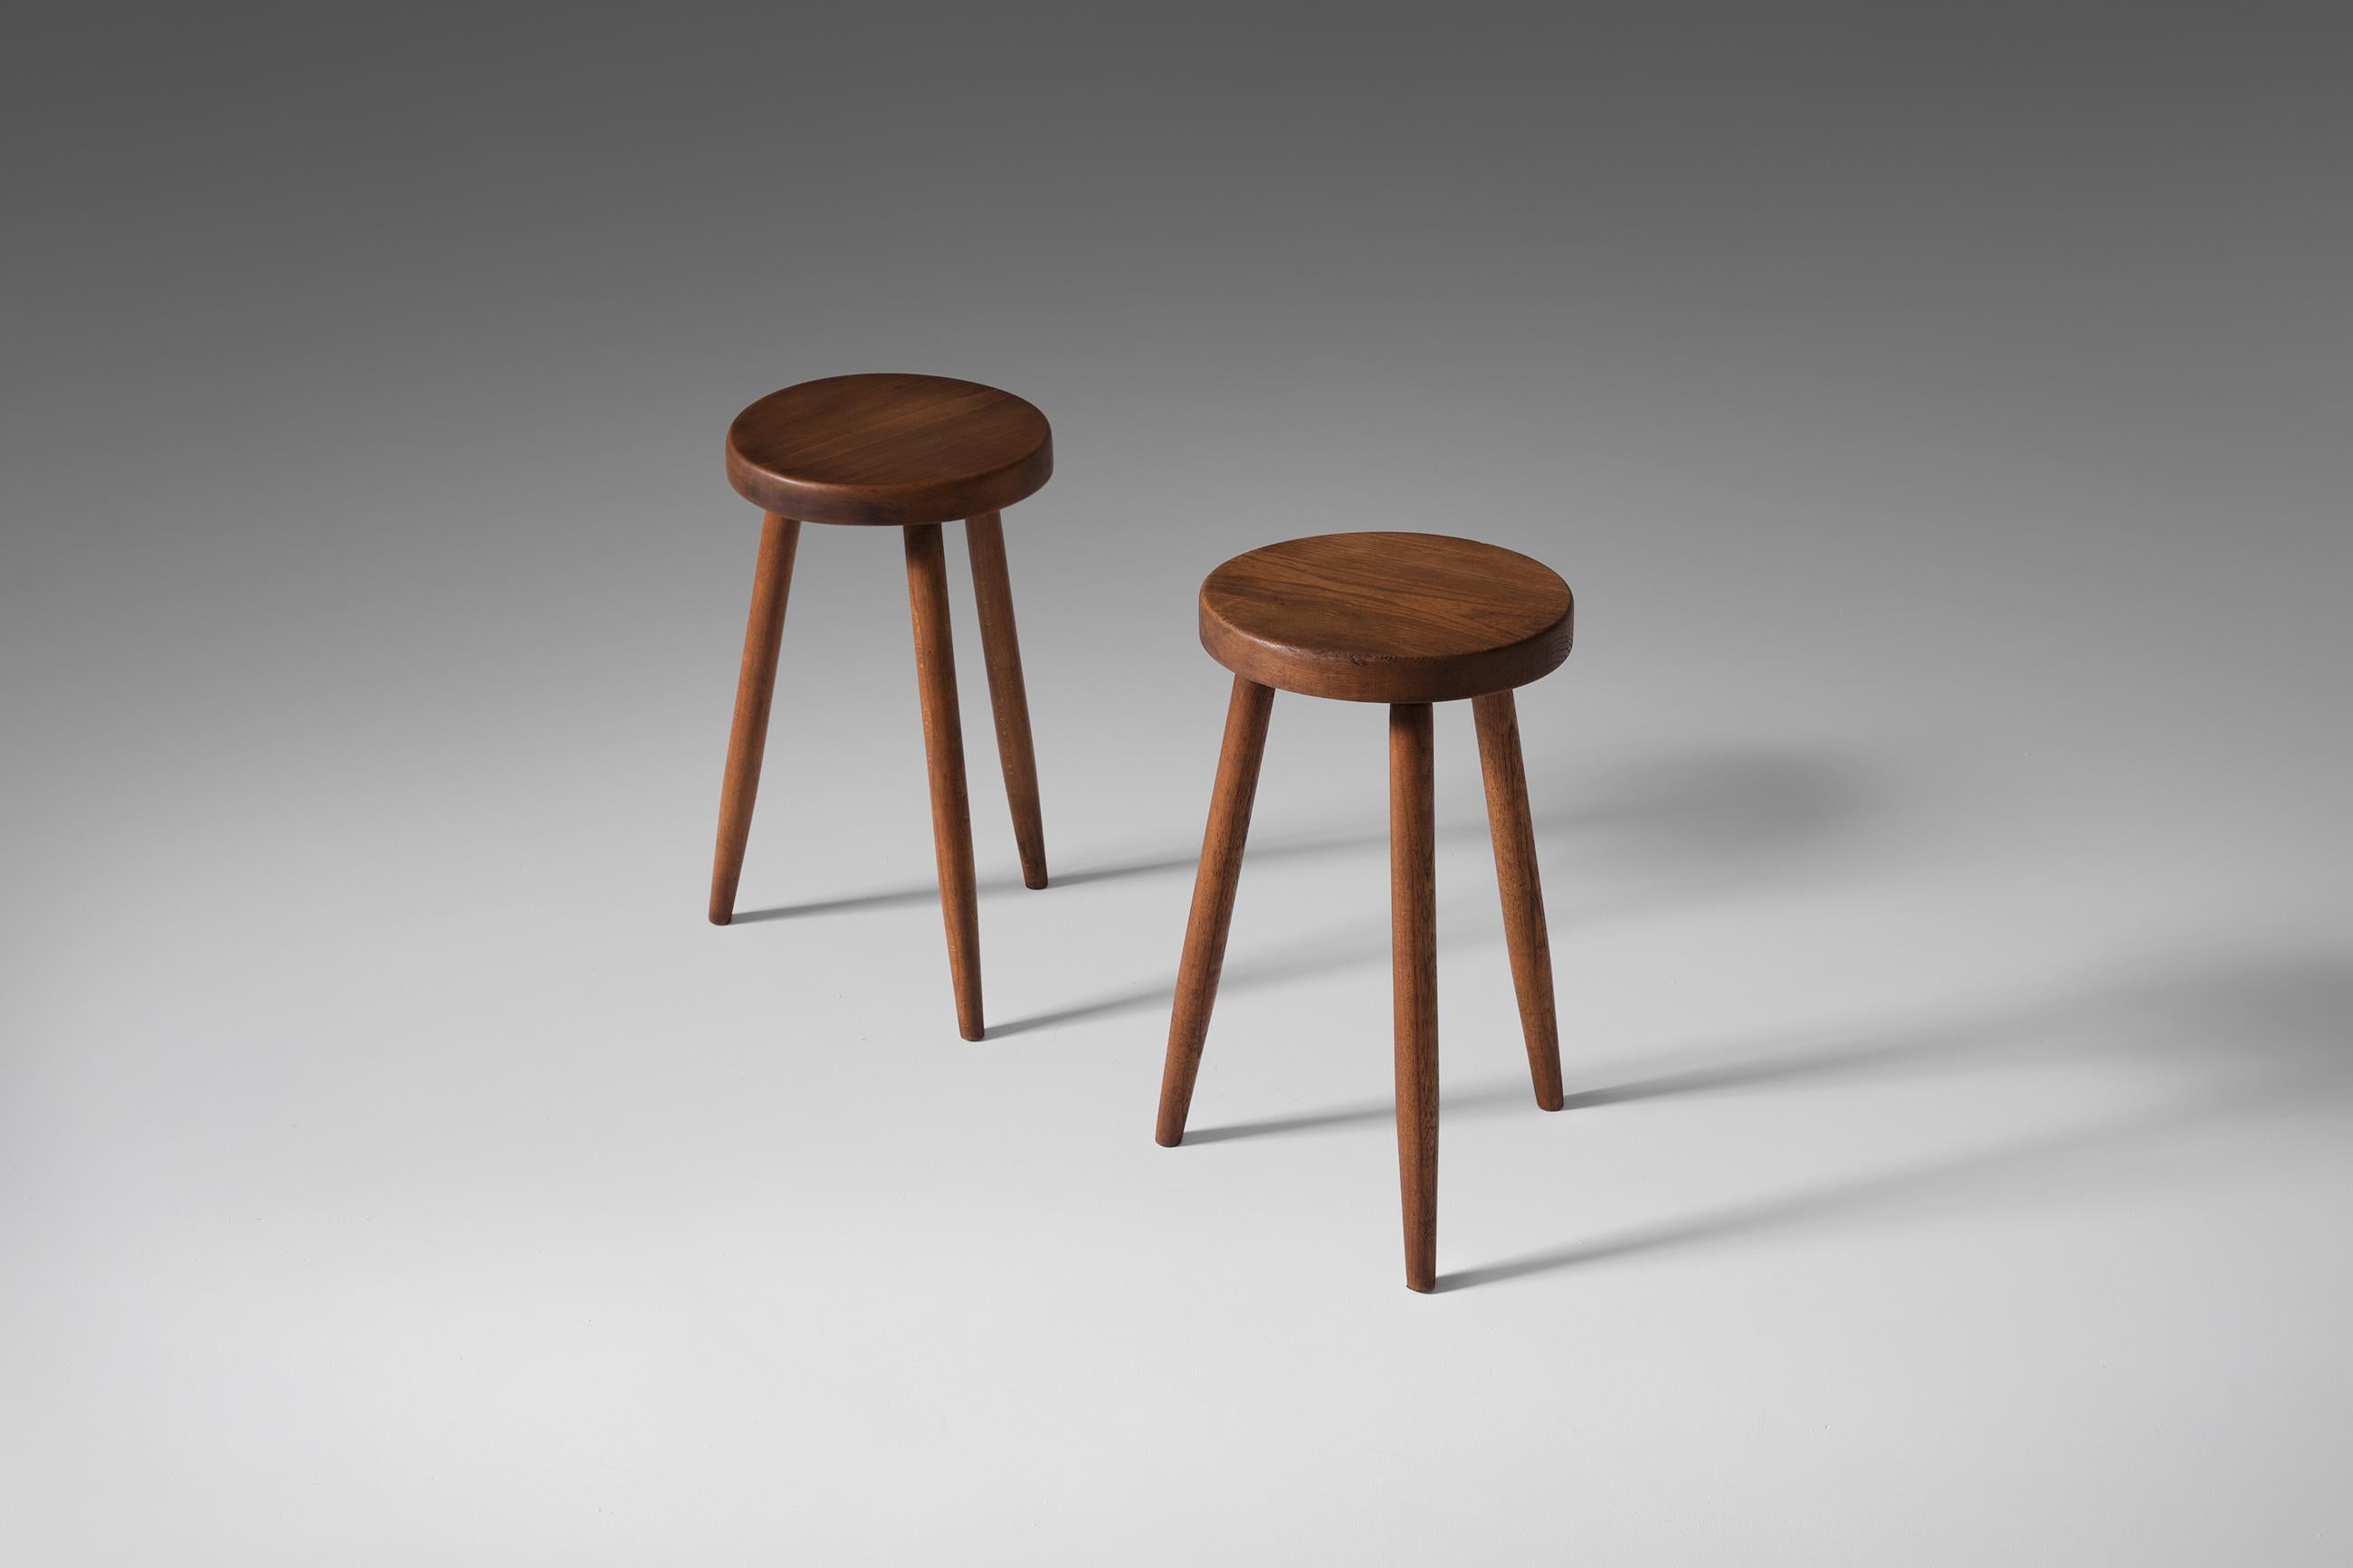 French Pair of Oak Stools with High Tapered Legs